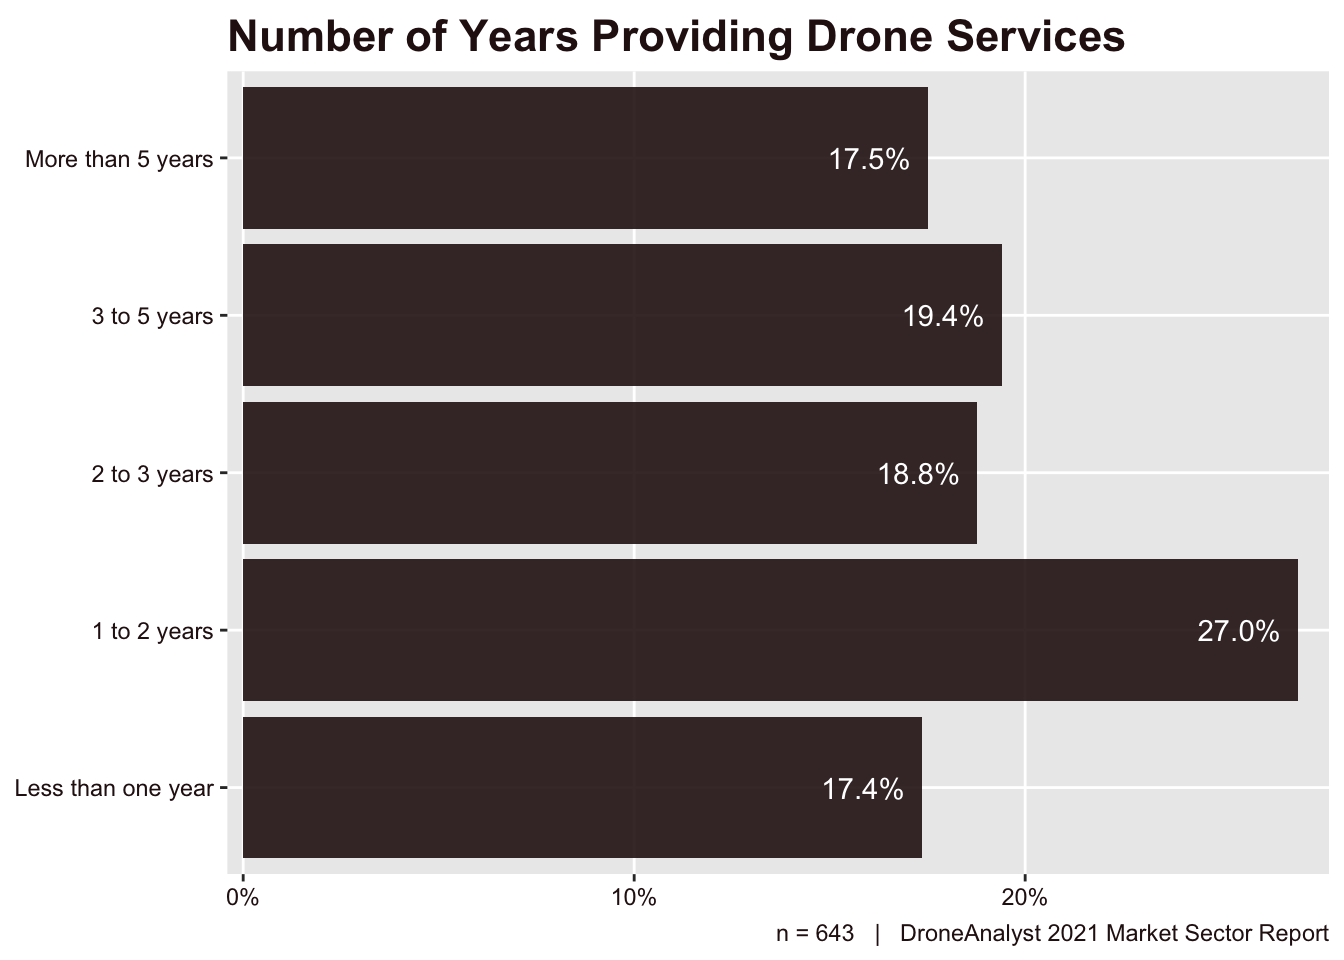 Number of Years Providing Drone Services